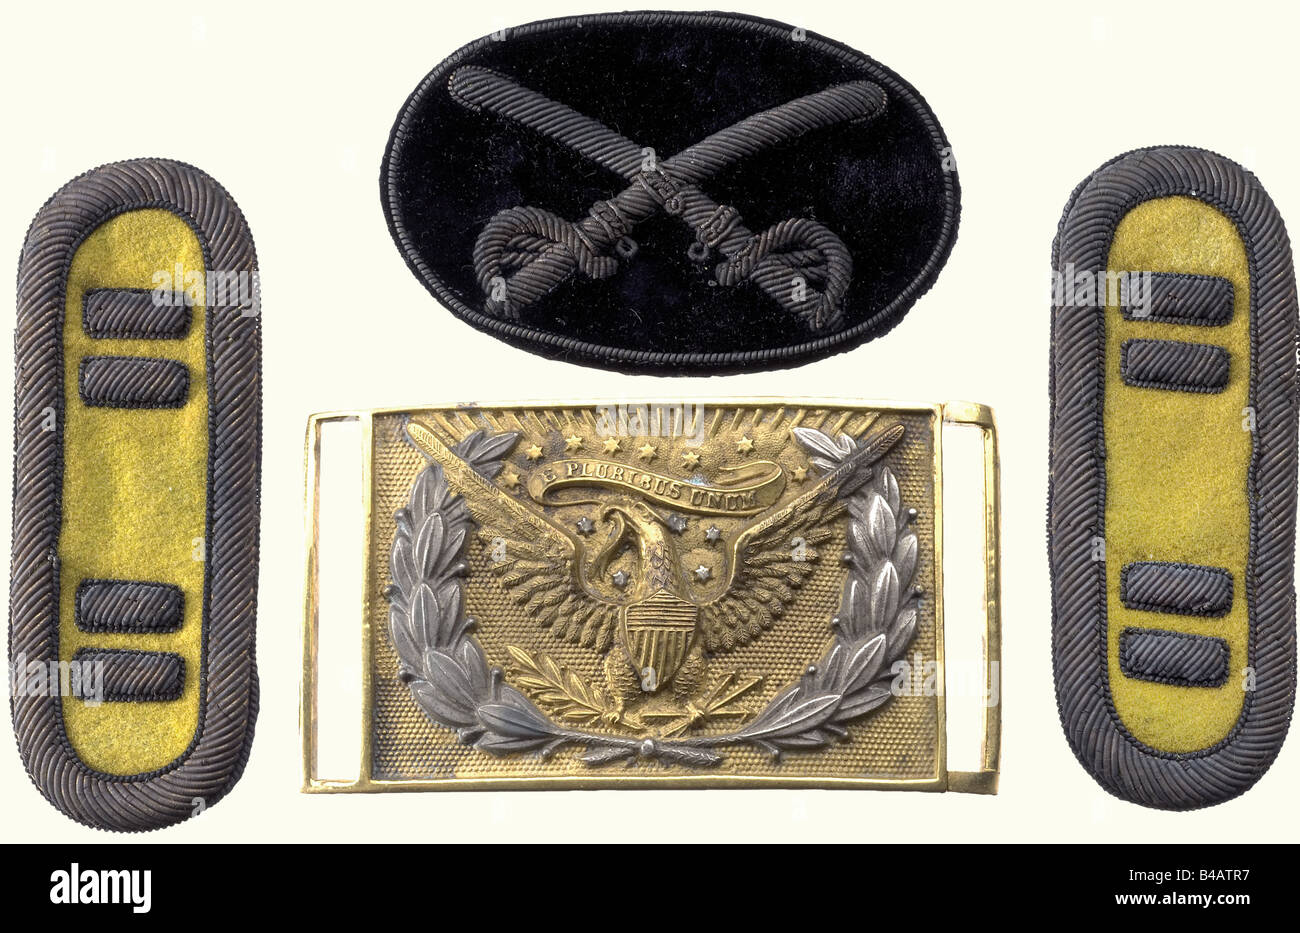 Insignia for a Northern Cavalry Captain, in the American Civil War (1861 - 1865). A pair of shoulder boards, yellow with silver embroidery and a cap badge of silver embroidery on black velvet. There is also a fire-gilded belt buckle with the American Eagle in a silver laurel wreath, complete with the opposite catch. historic, historical, 19th century, USA, United States of America, American, object, objects, stills, clipping, clippings, cut out, cut-out, cut-outs, uniform, uniforms, Stock Photo